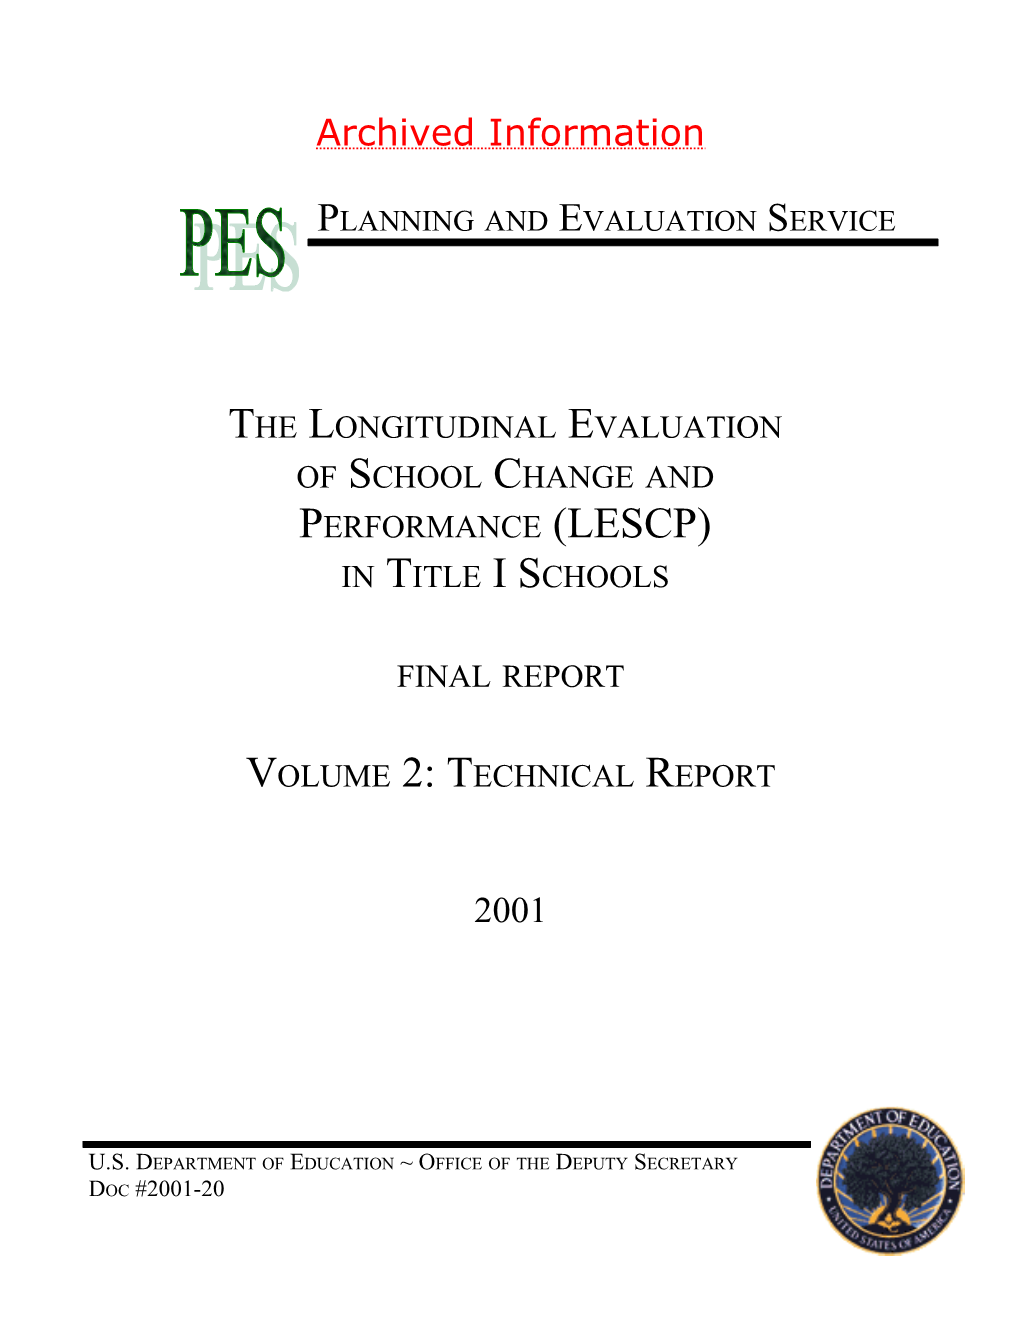 The Longitudinal Evaluation of School Change and Performance (LESCP) in Title I Schools